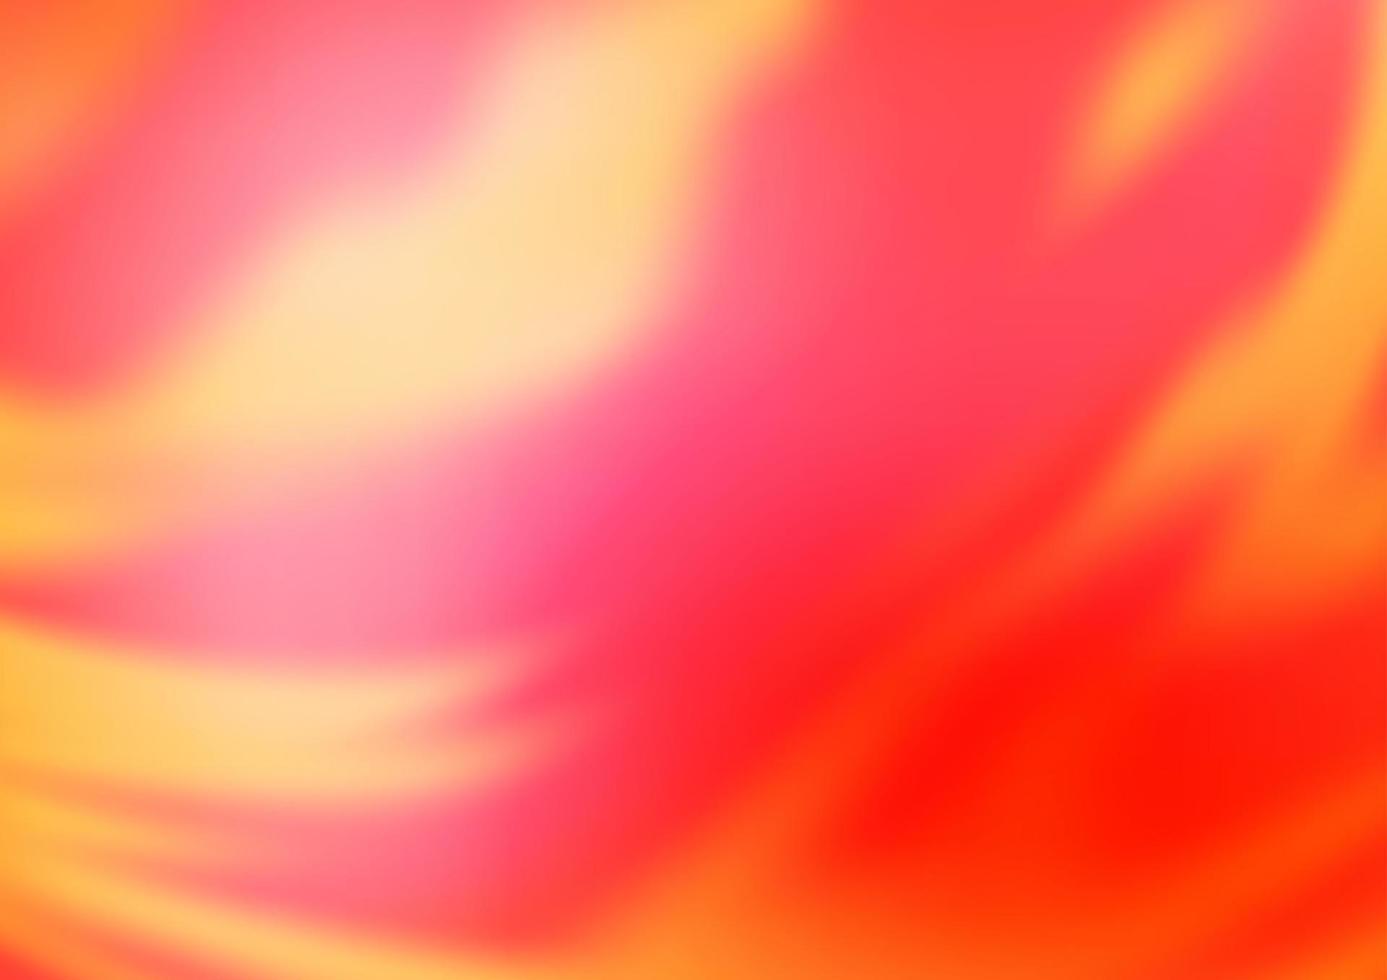 Light Red vector abstract blurred pattern.